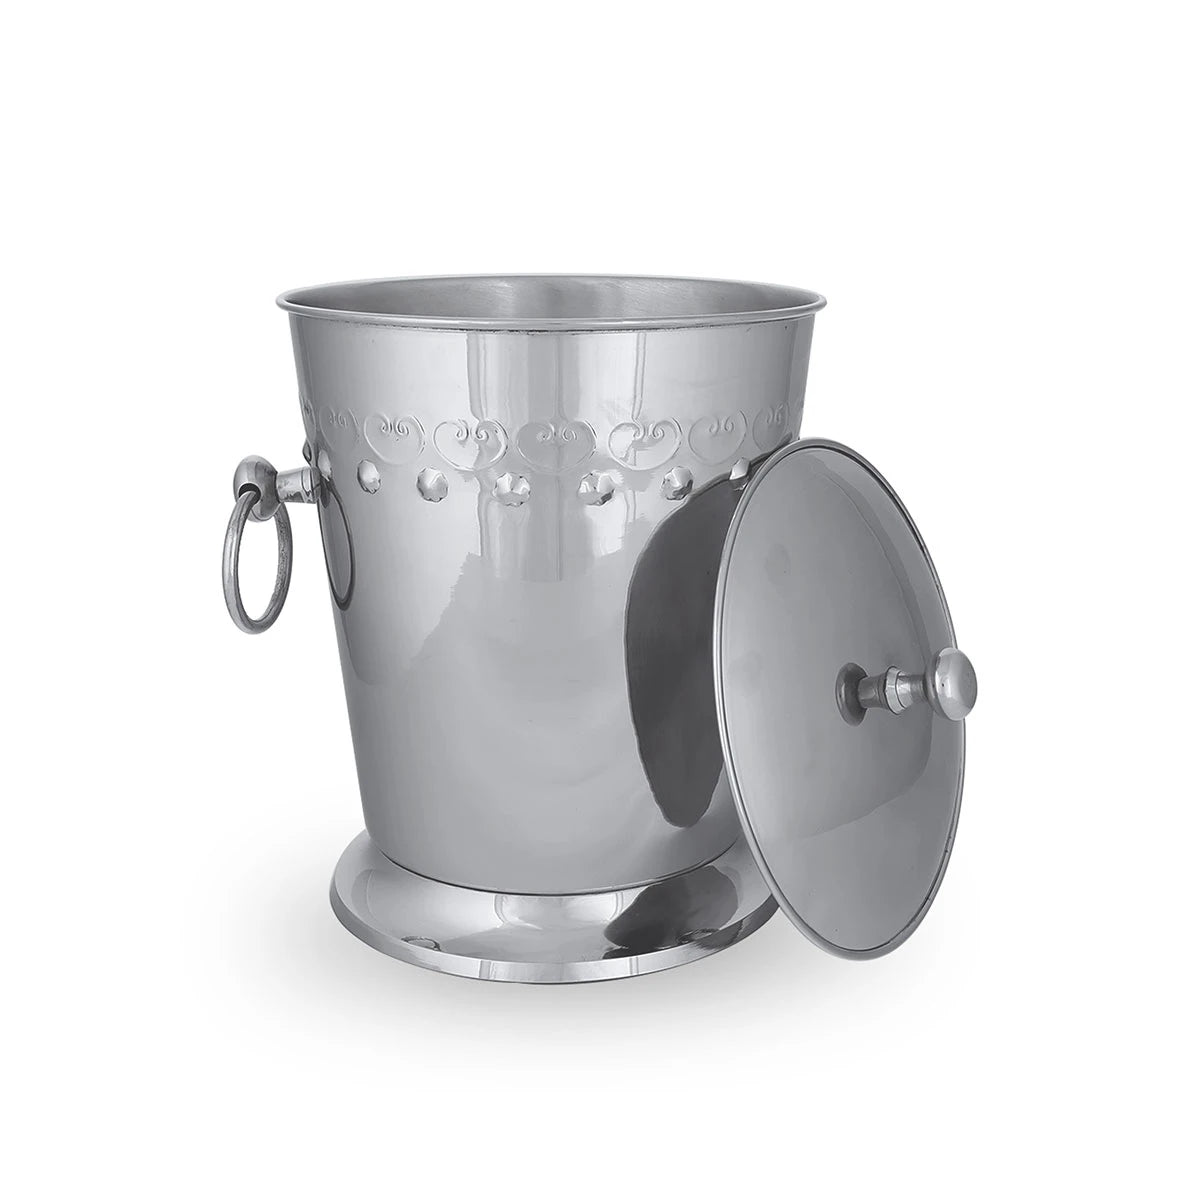 Front View of Silver Color Brass Metal Ice Bucket